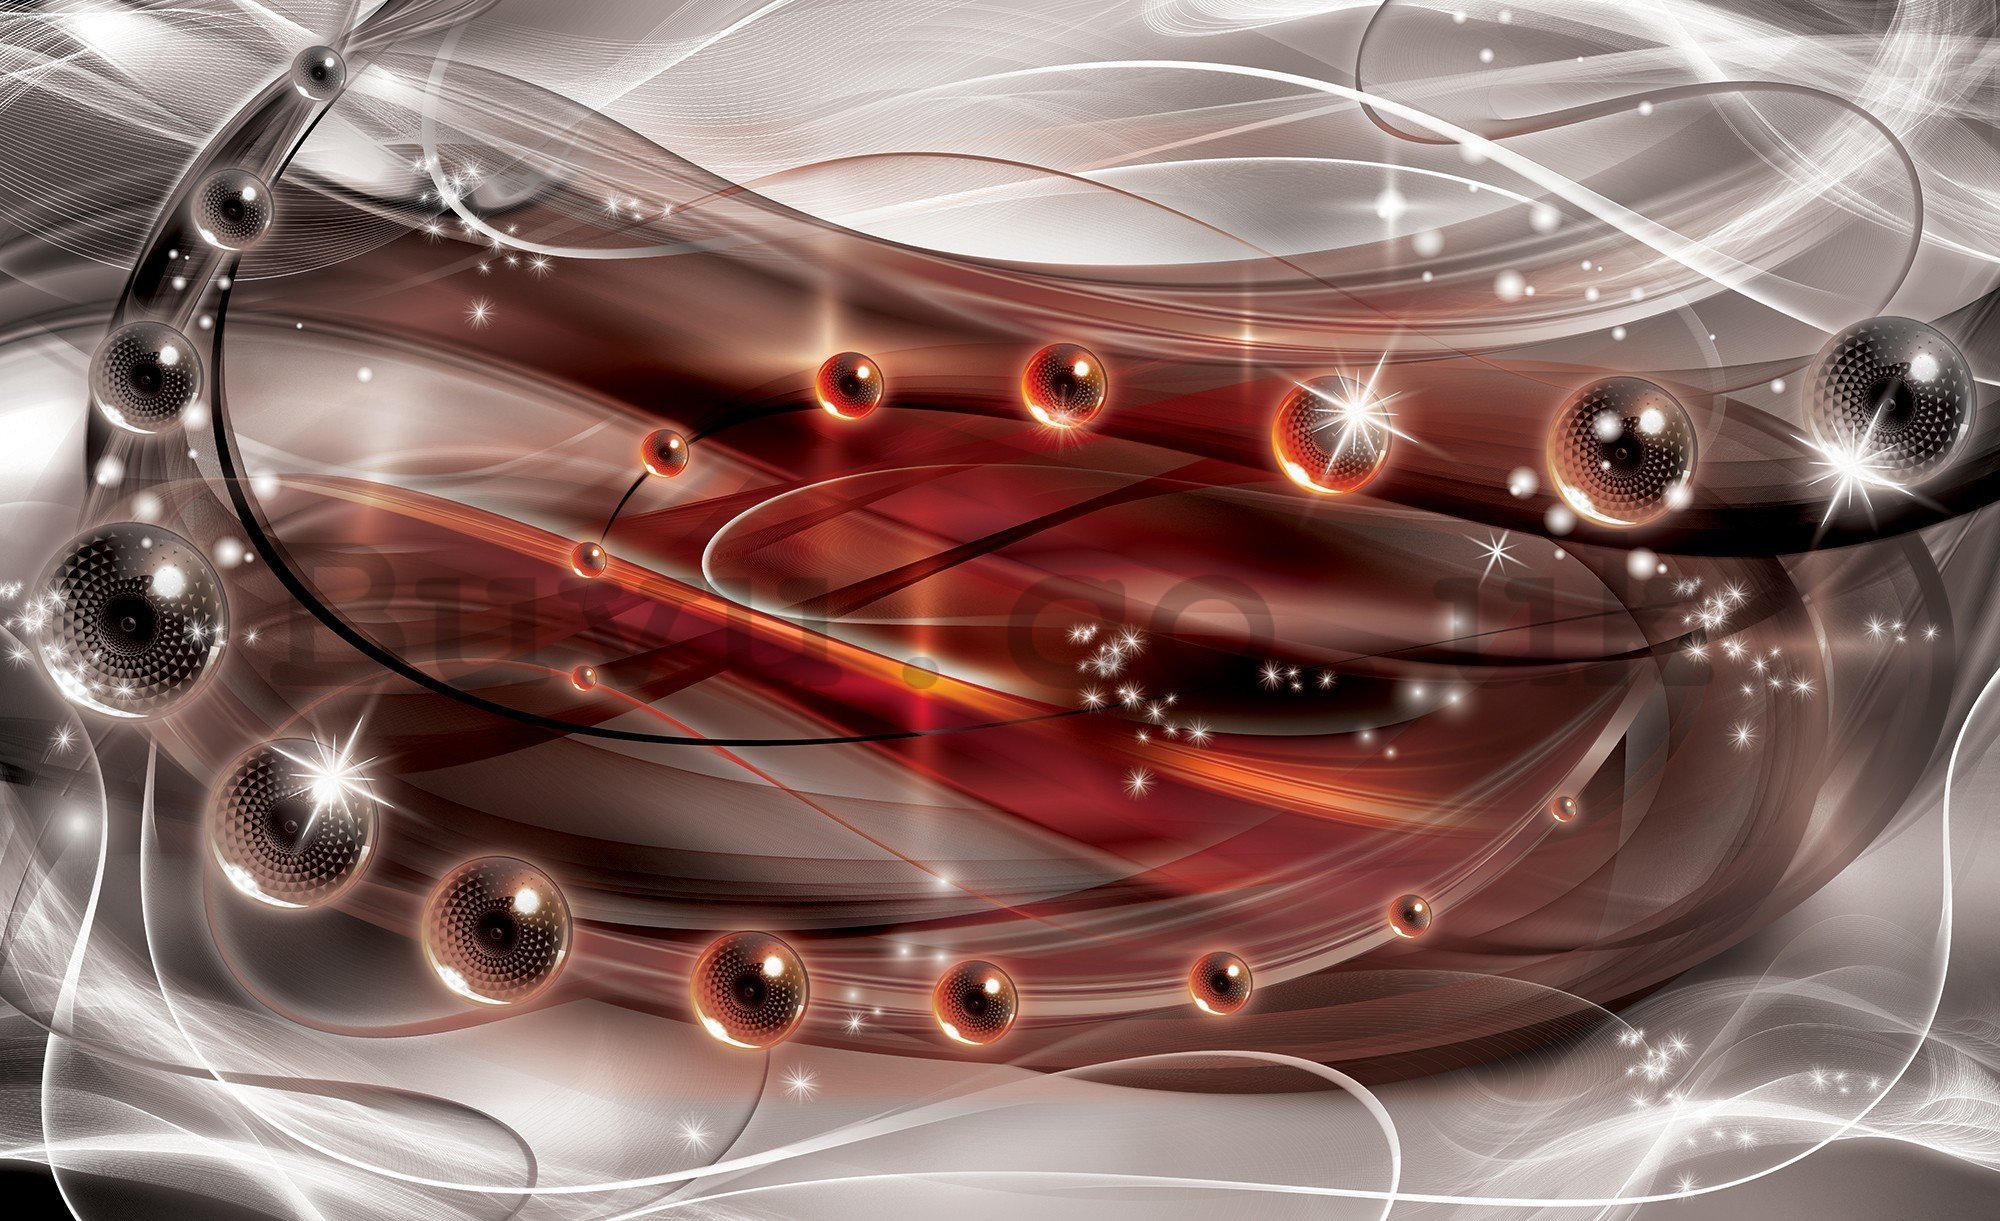 Wall mural vlies: Glossy abstract (red) - 416x254 cm